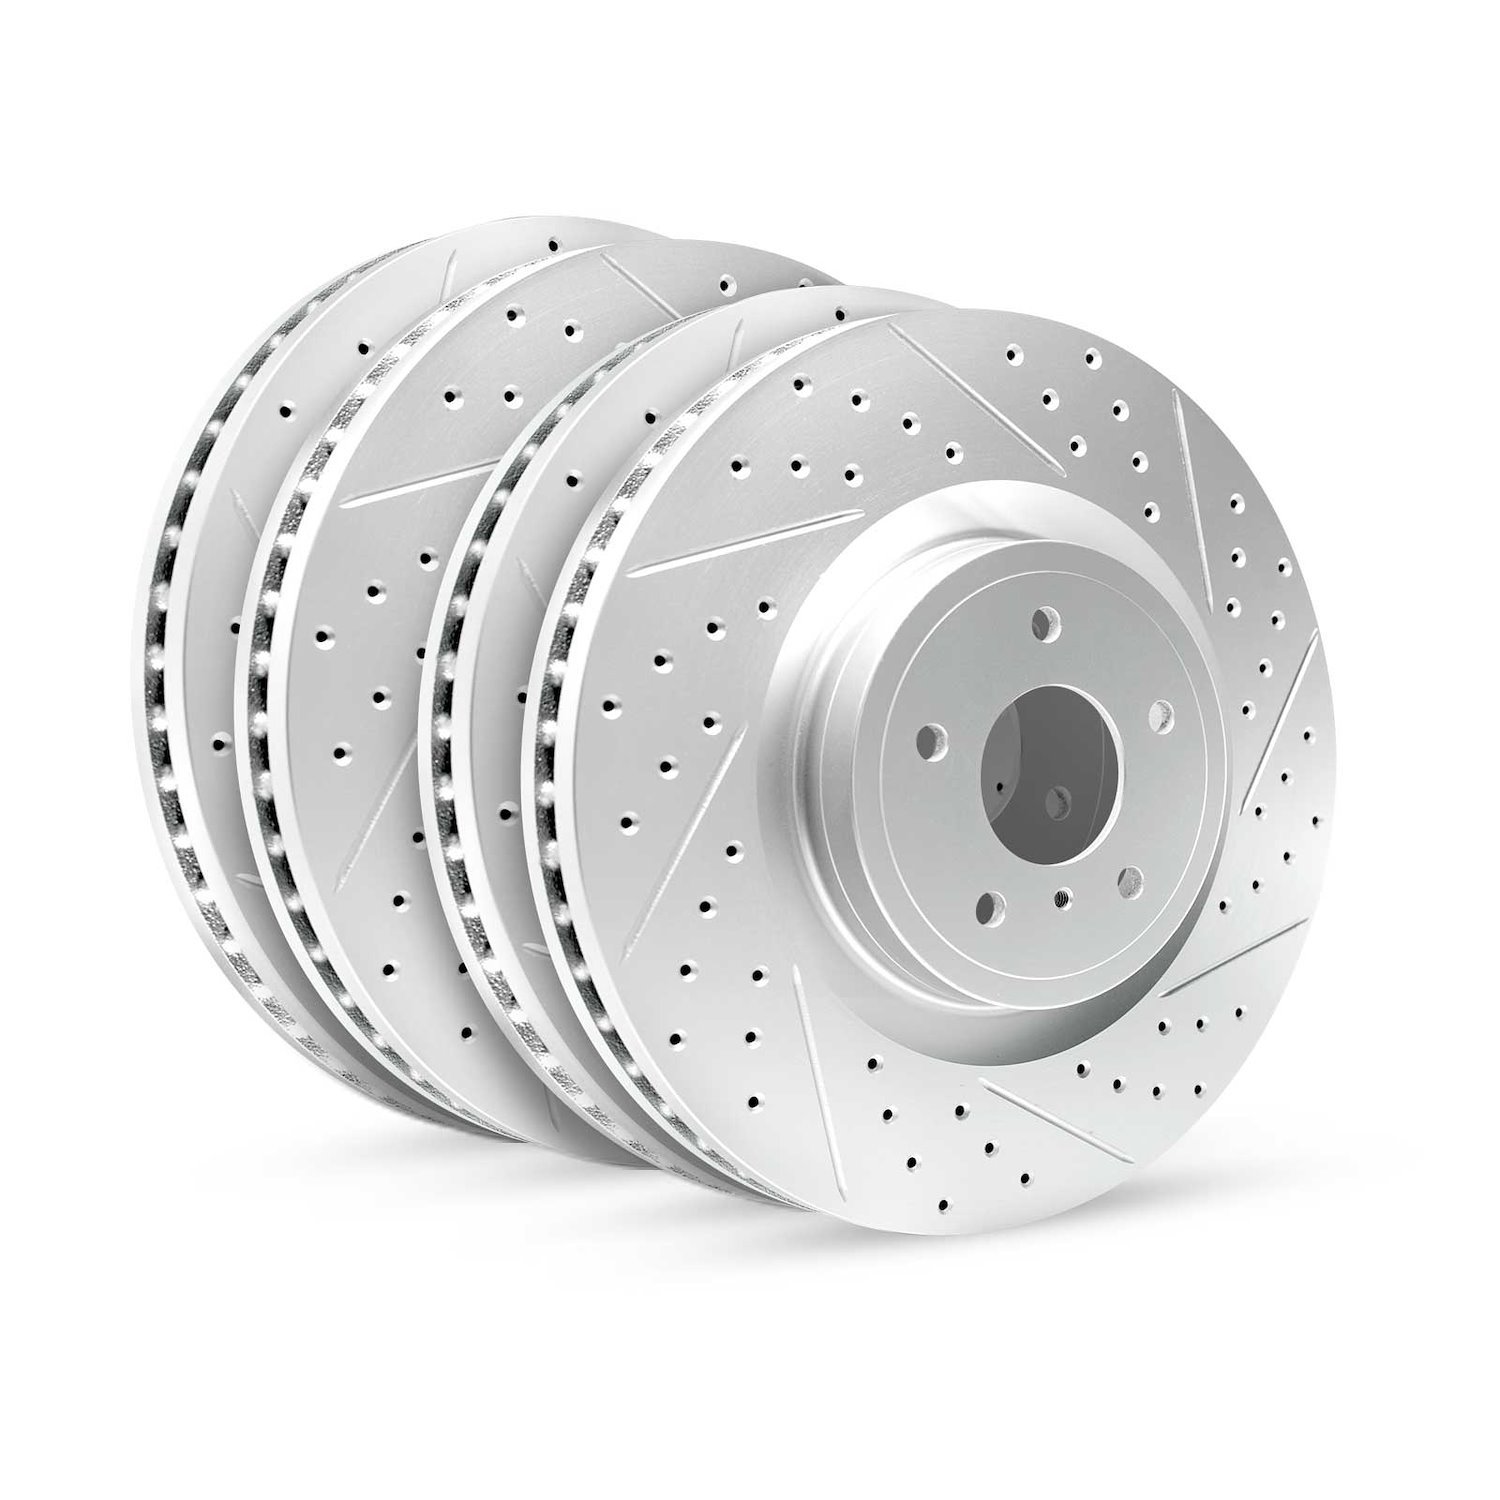 GEO-Carbon Drilled/Slotted Rotors, 2017-2017 Land Rover, Position: Front/Rear